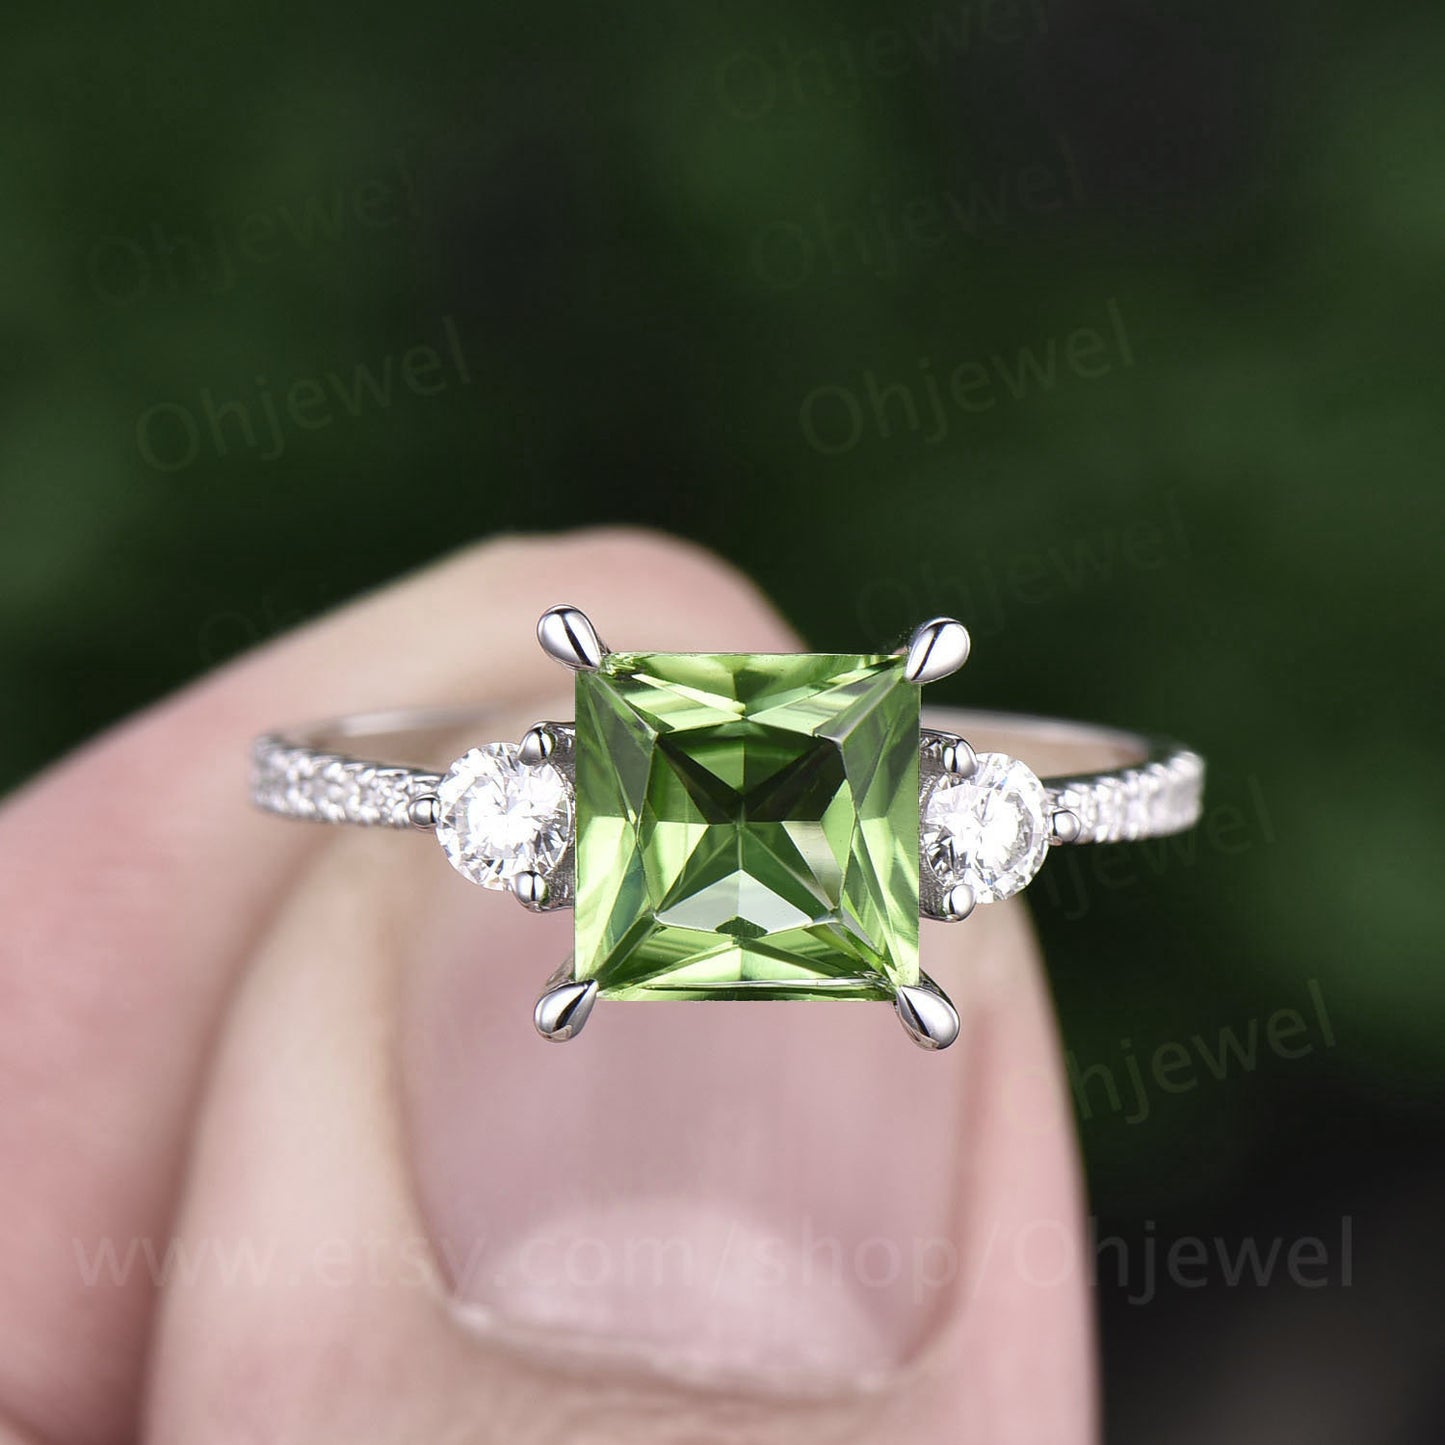 Princess cut engagement ring vintage peridot engagement ring moissanite rings for women solid white gold birthday gift peridot jewelry